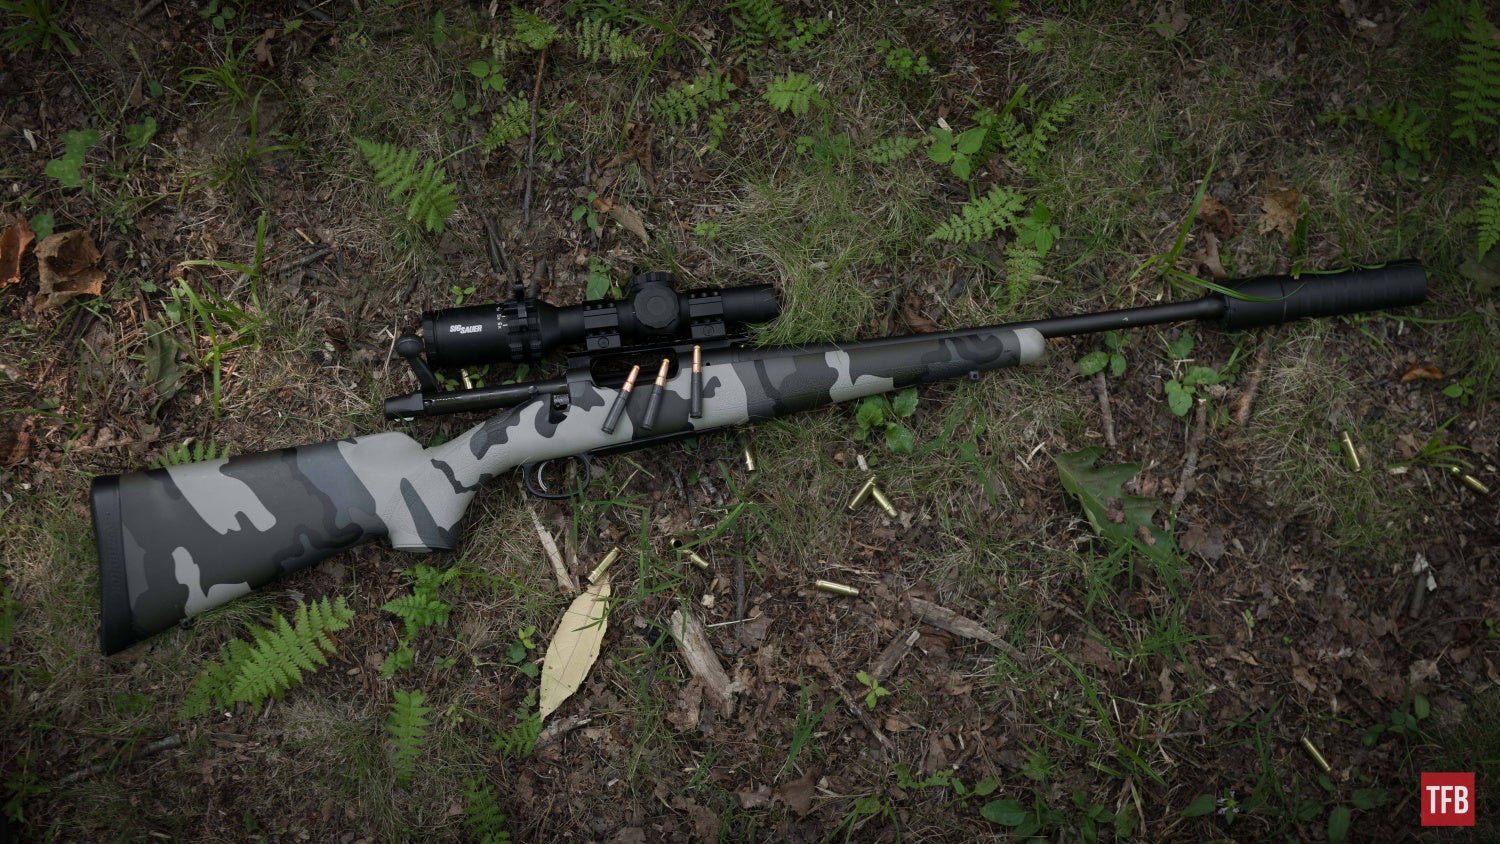 SILENCER SATURDAY #241: Be Very Quiet, We’re Hunting With the SilencerCo Harvester Evo